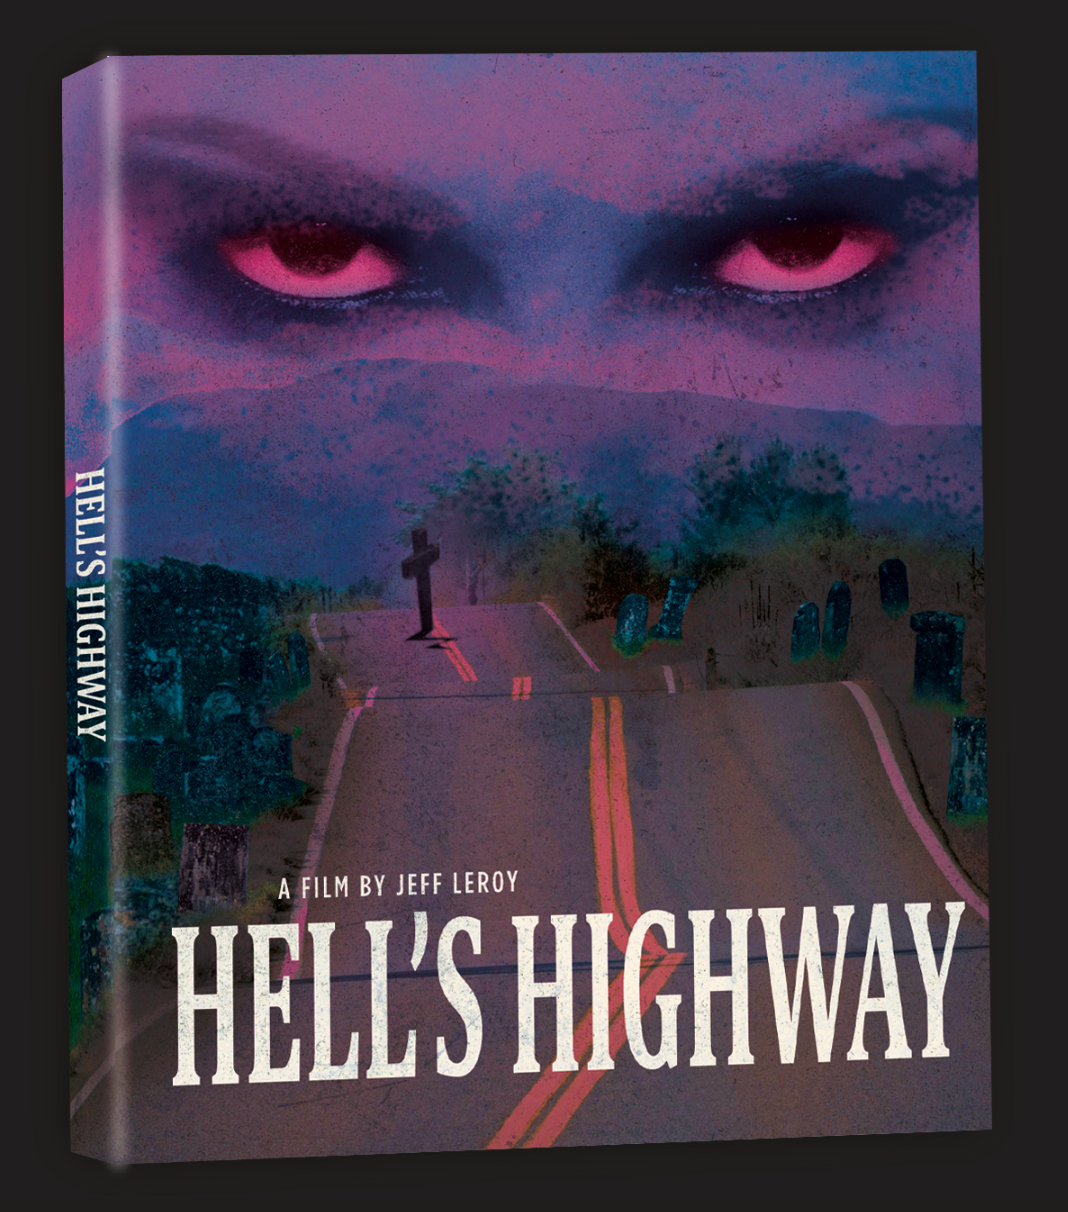 Hell's Highway (2002) blu-ray with slip